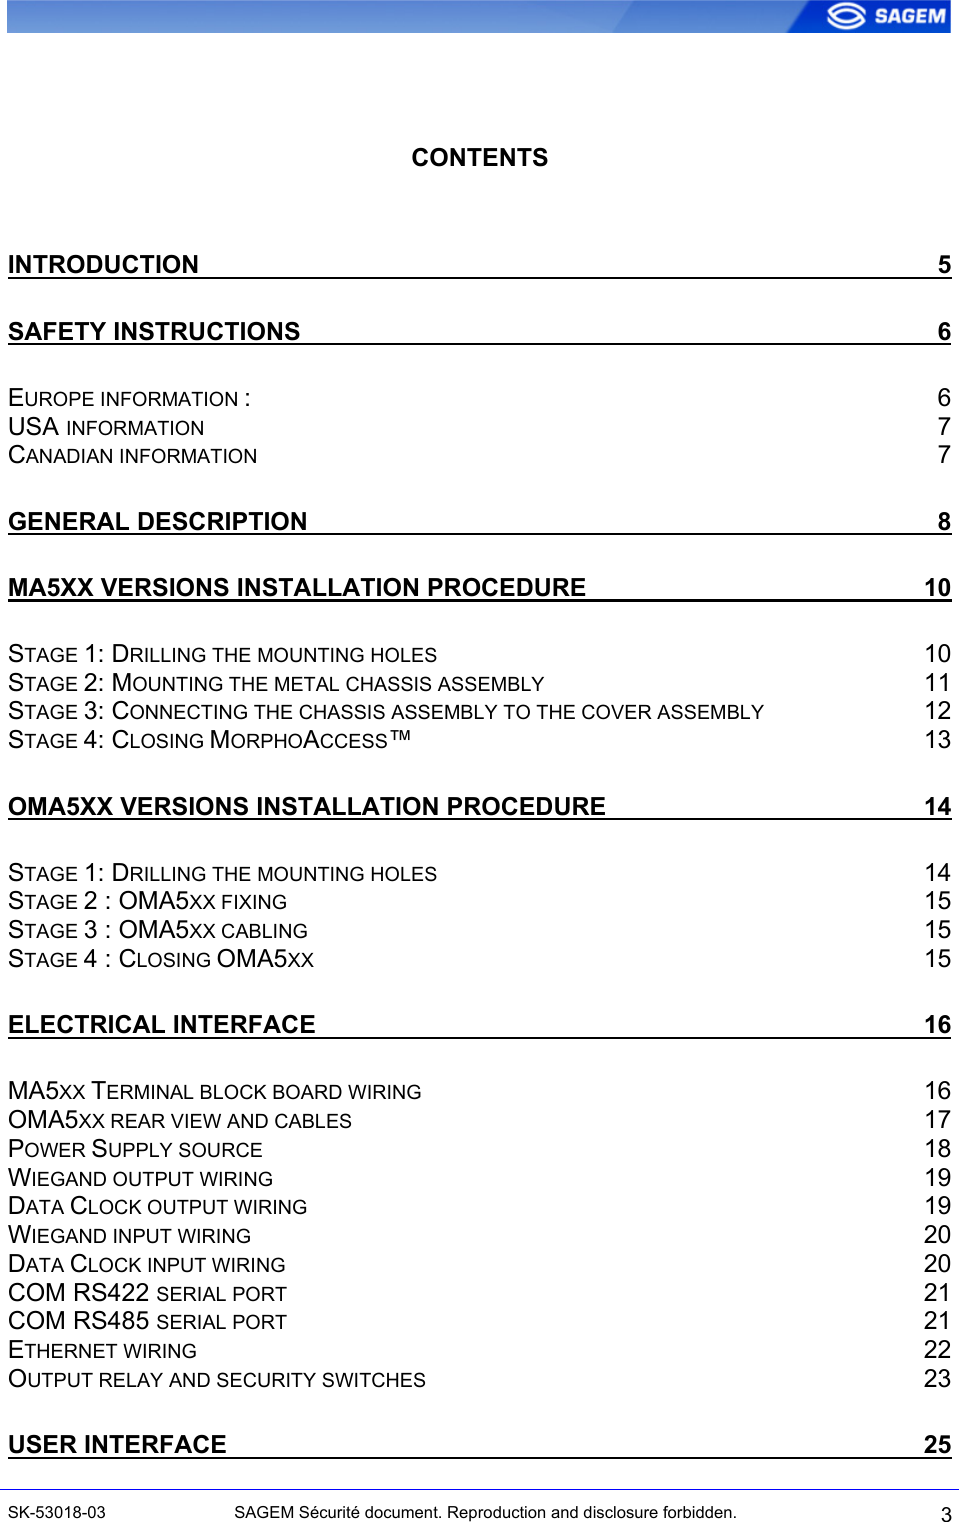    CONTENTS  INTRODUCTION 5 SAFETY INSTRUCTIONS 6 EUROPE INFORMATION : 6 USA INFORMATION 7 CANADIAN INFORMATION 7 GENERAL DESCRIPTION 8 MA5XX VERSIONS INSTALLATION PROCEDURE 10 STAGE 1: DRILLING THE MOUNTING HOLES 10 STAGE 2: MOUNTING THE METAL CHASSIS ASSEMBLY 11 STAGE 3: CONNECTING THE CHASSIS ASSEMBLY TO THE COVER ASSEMBLY 12 STAGE 4: CLOSING MORPHOACCESS™ 13 OMA5XX VERSIONS INSTALLATION PROCEDURE 14 STAGE 1: DRILLING THE MOUNTING HOLES 14 STAGE 2 : OMA5XX FIXING 15 STAGE 3 : OMA5XX CABLING 15 STAGE 4 : CLOSING OMA5XX 15 ELECTRICAL INTERFACE 16 MA5XX TERMINAL BLOCK BOARD WIRING 16 OMA5XX REAR VIEW AND CABLES 17 POWER SUPPLY SOURCE 18 WIEGAND OUTPUT WIRING 19 DATA CLOCK OUTPUT WIRING 19 WIEGAND INPUT WIRING 20 DATA CLOCK INPUT WIRING 20 COM RS422 SERIAL PORT 21 COM RS485 SERIAL PORT 21 ETHERNET WIRING 22 OUTPUT RELAY AND SECURITY SWITCHES 23 USER INTERFACE 25 SK-53018-03  SAGEM Sécurité document. Reproduction and disclosure forbidden.  3 